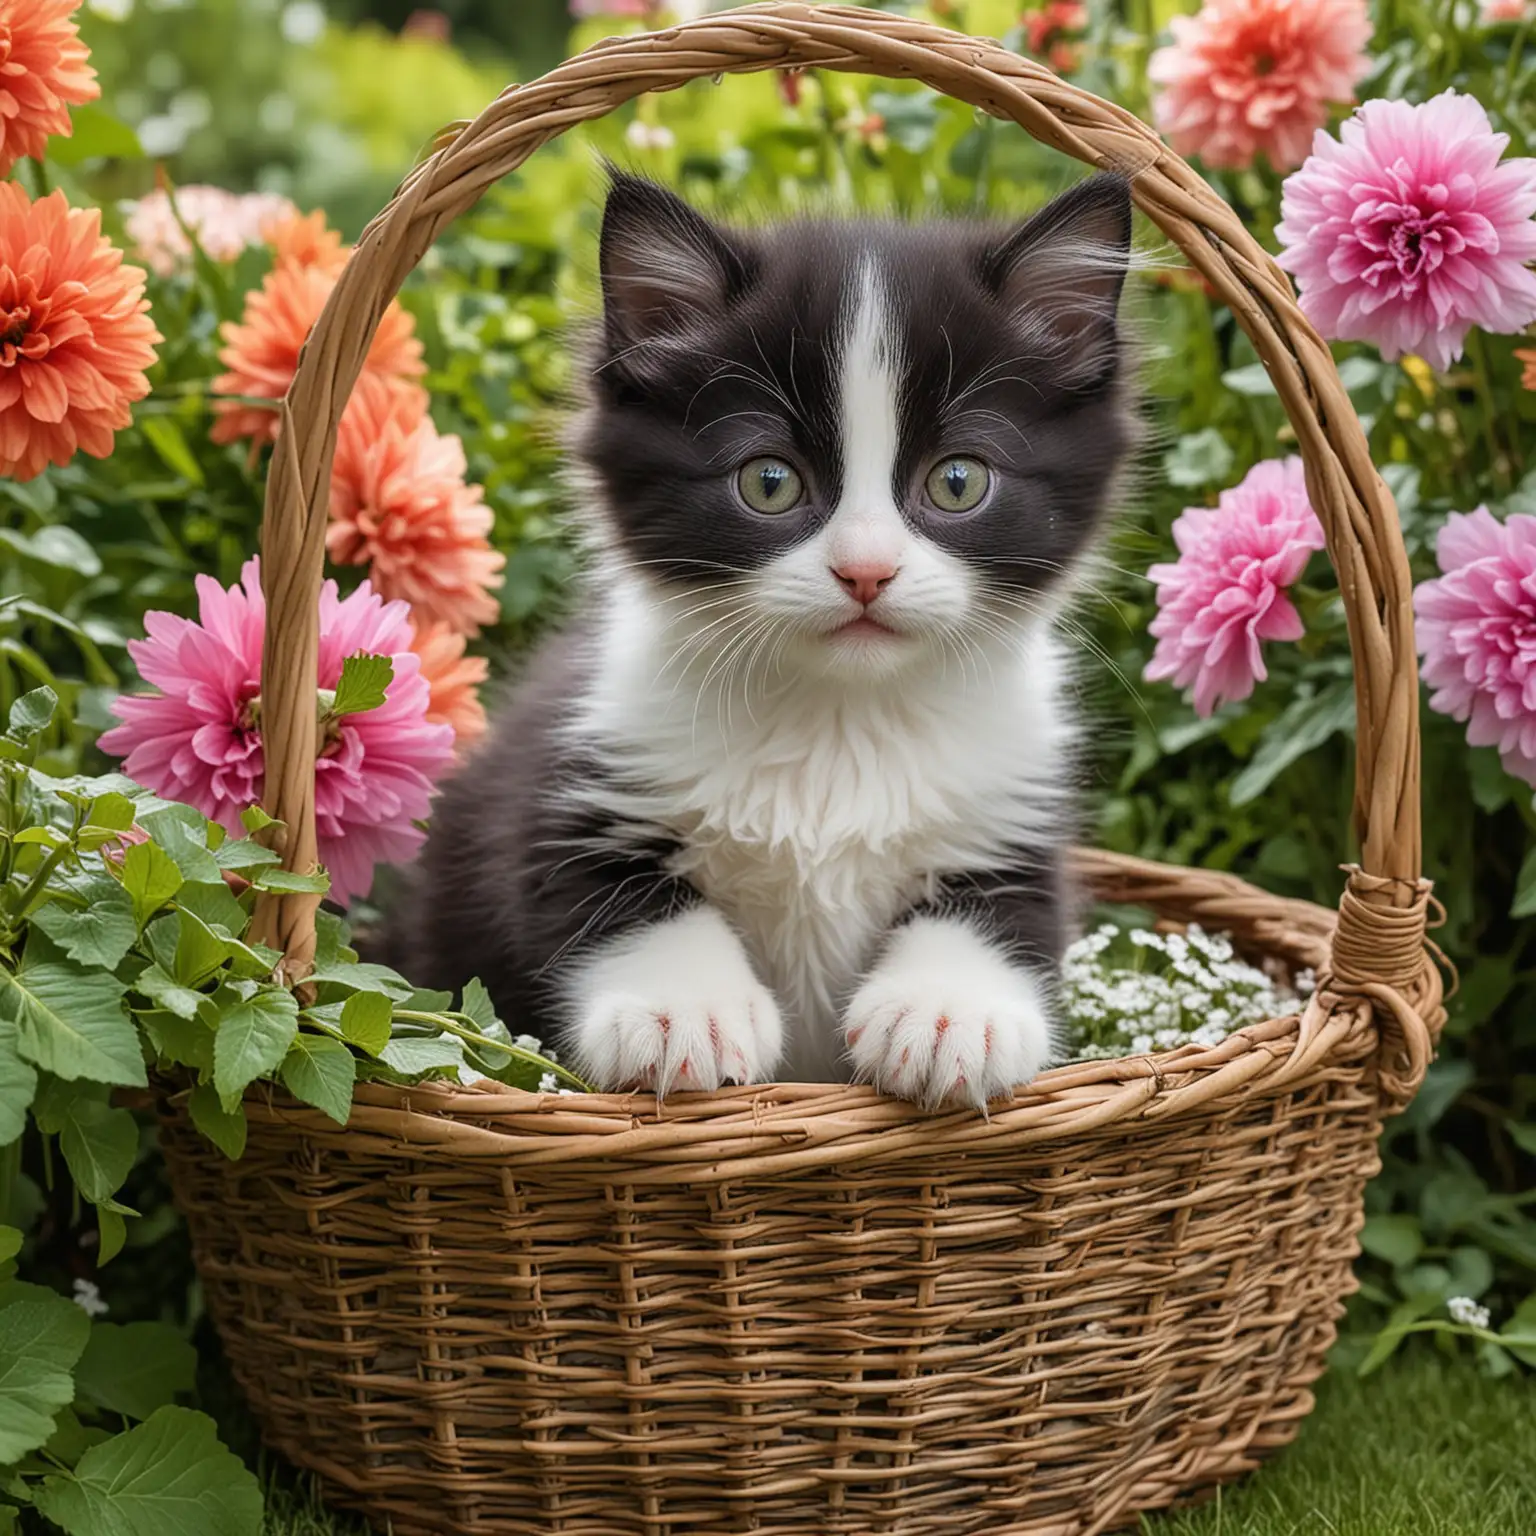 An adorable fluffy, black and white wide-eyed kitten tumbles playfully in a wicker basket overflowing with vibrant flowers in a green garden